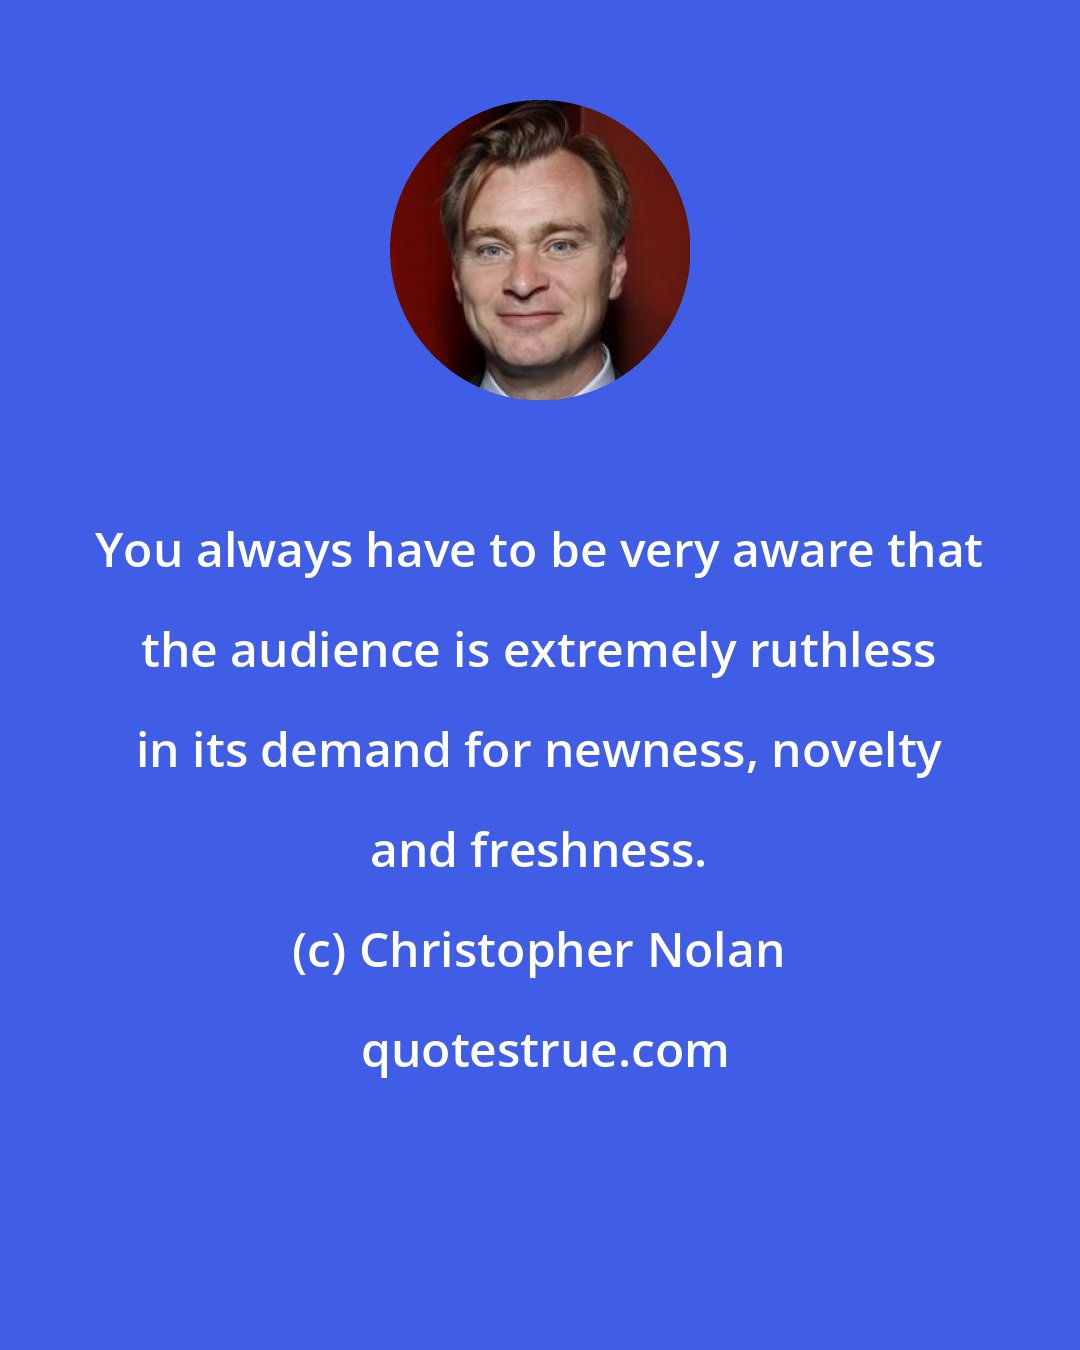 Christopher Nolan: You always have to be very aware that the audience is extremely ruthless in its demand for newness, novelty and freshness.